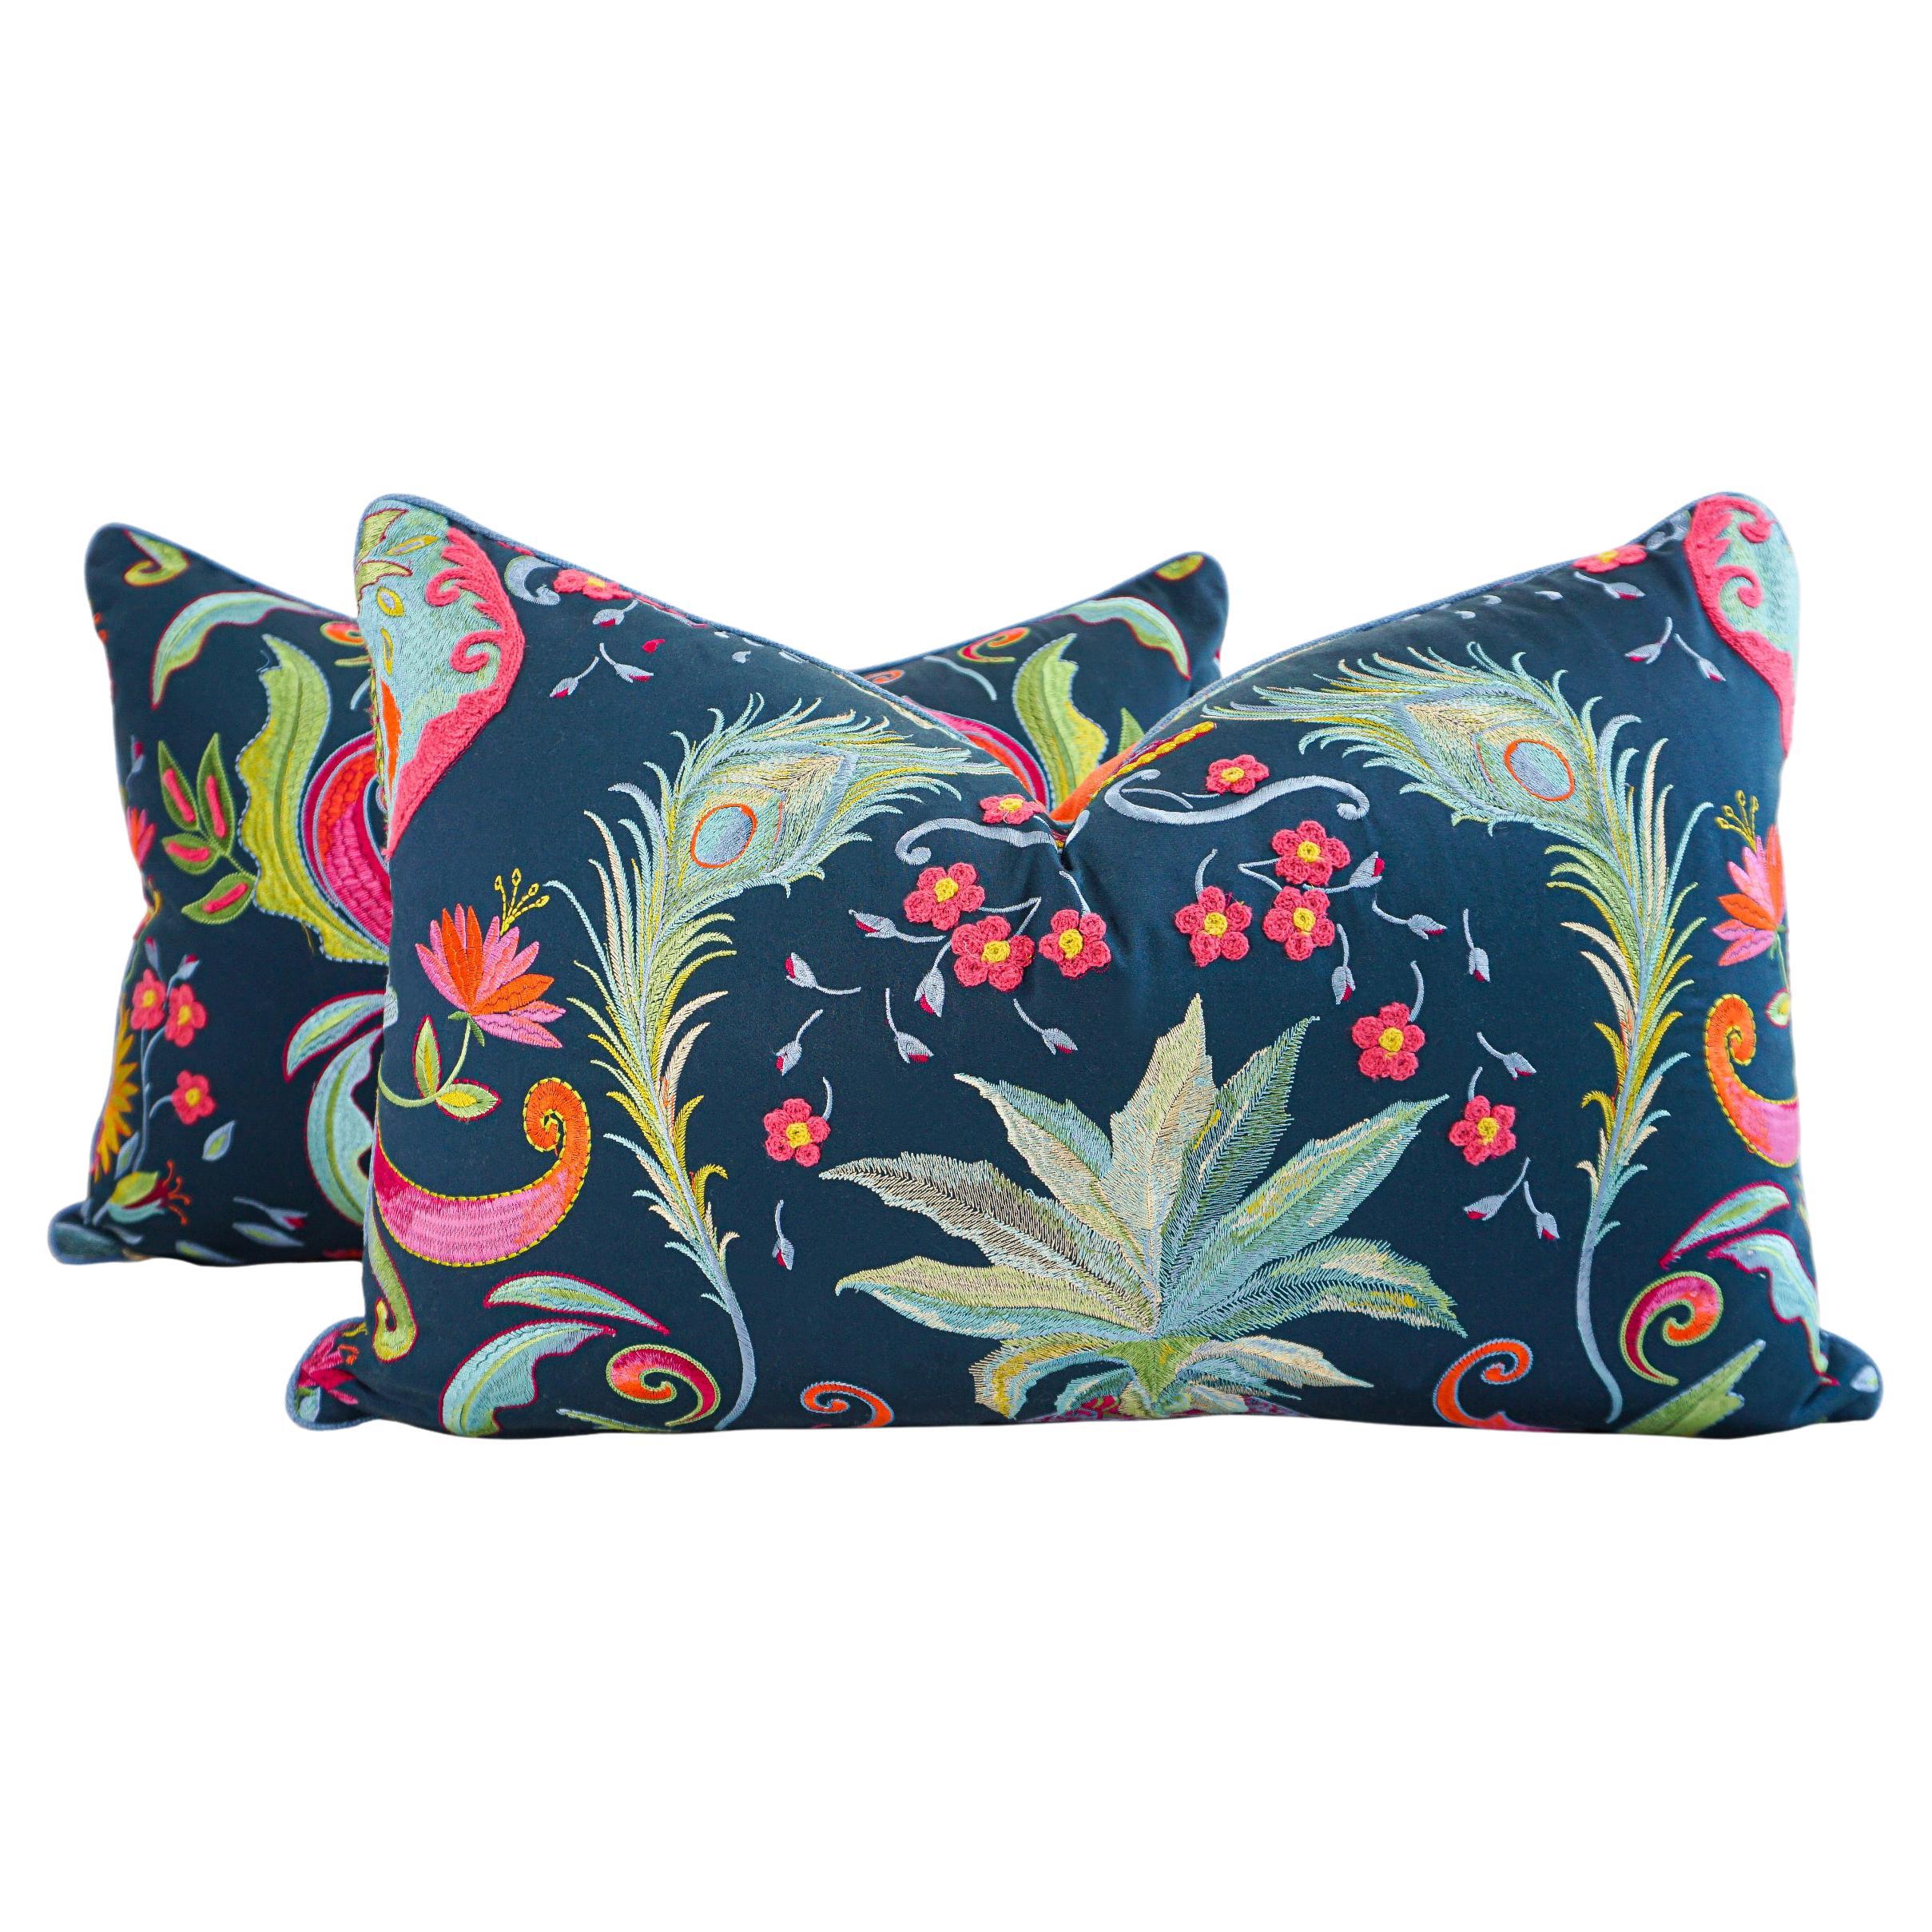 Navy Lumbar Pillow with Fluorescent Embroidery For Sale